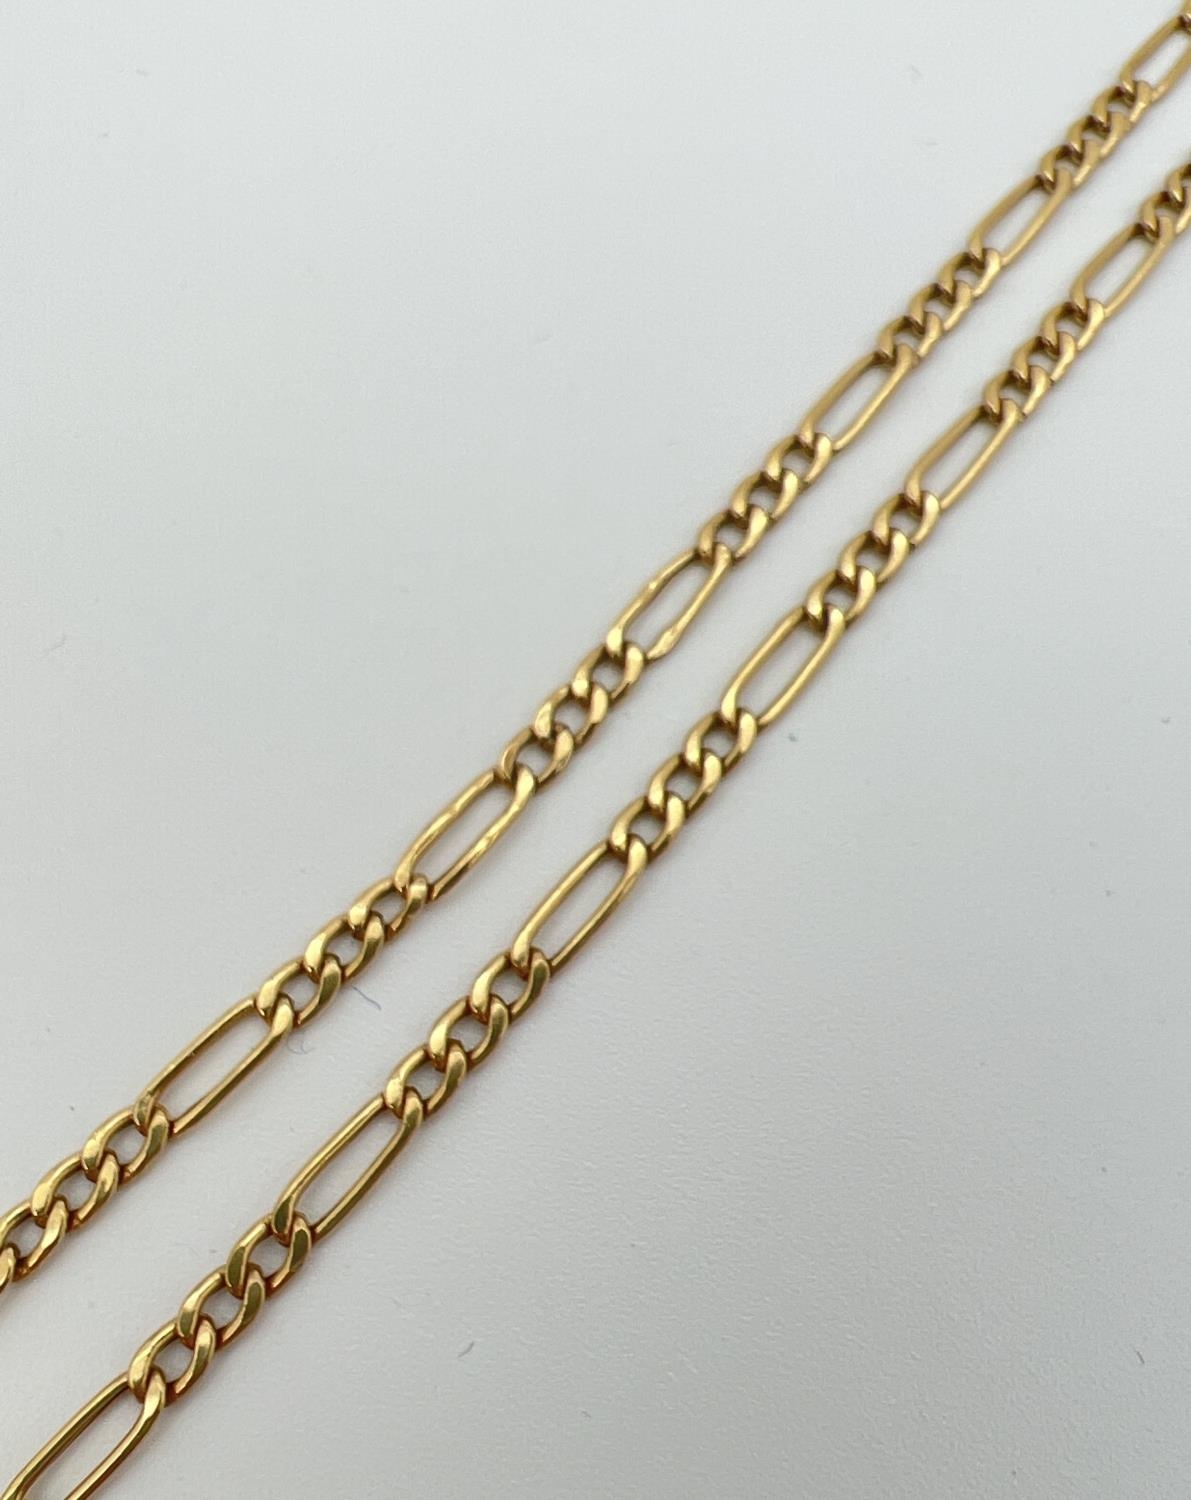 An 18" 9ct yellow gold figaro chain necklace with spring ring clasp. Both hook end links and clasp